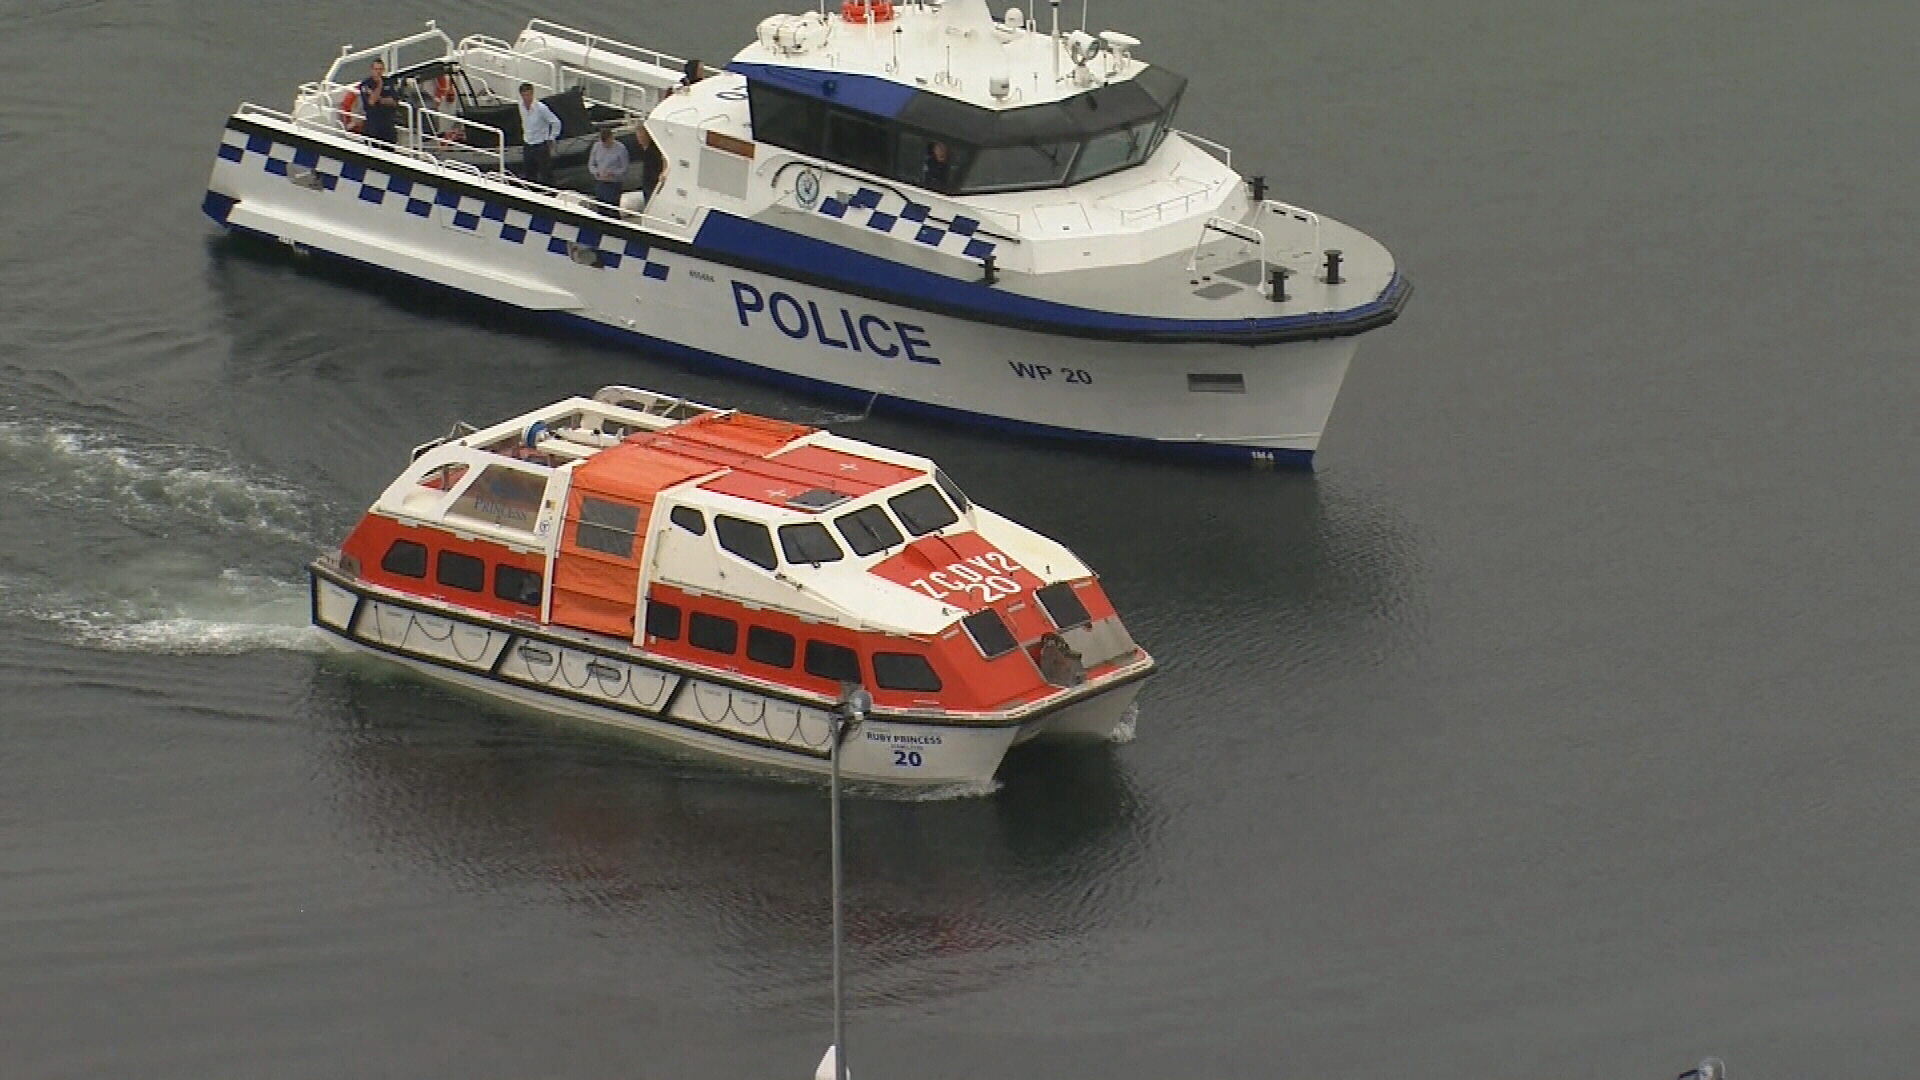 Police escorted NSW Health and an independent medical team to the cruise ship.